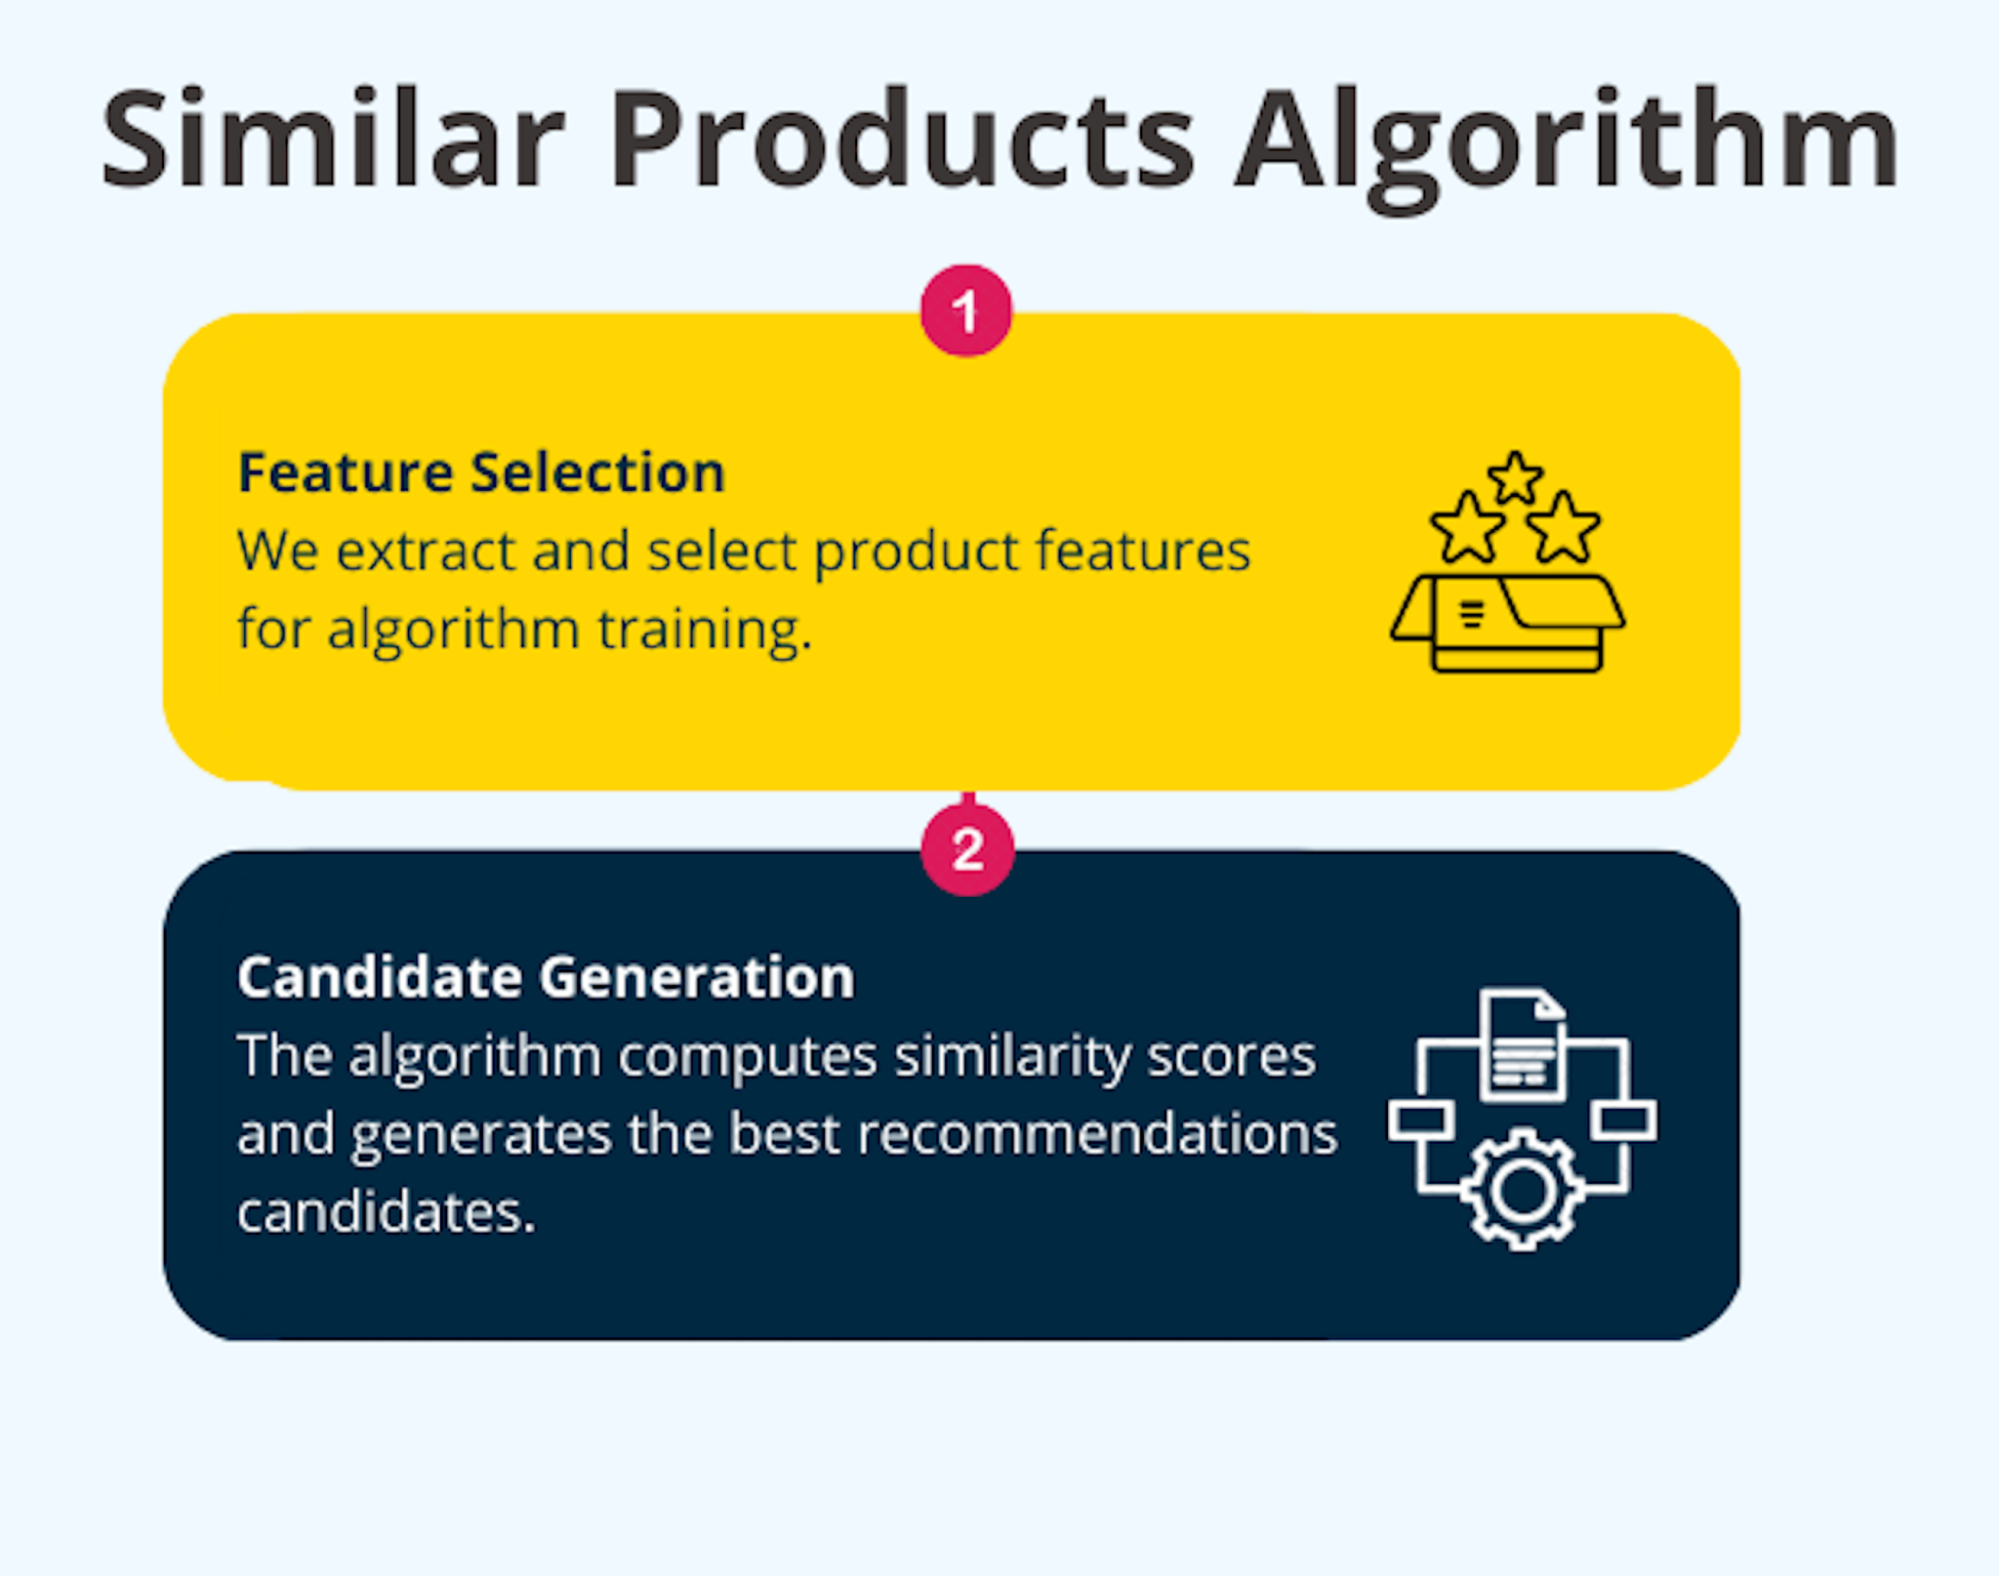 This illustration summarizes how the Similar Products Algorithm ranks and builds the widget recall.